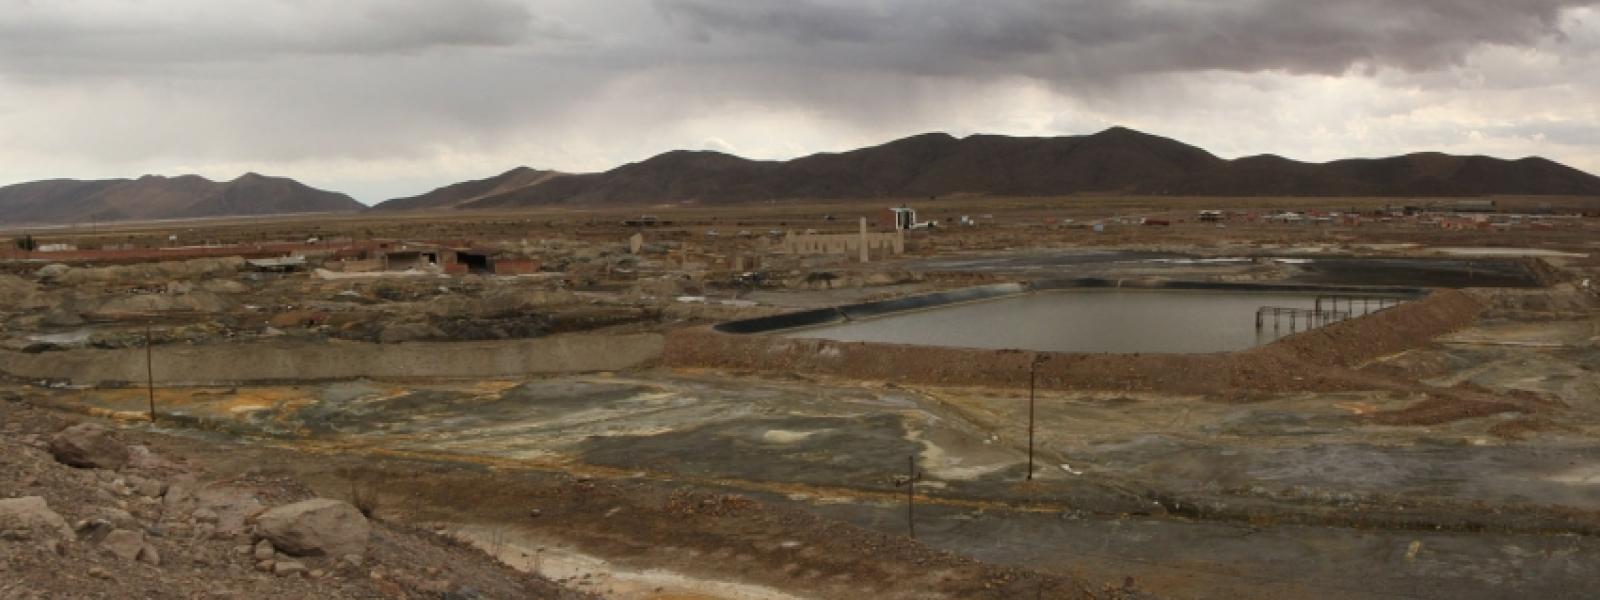 At the entrance to Poopó, the landscape includes pools of mining waste and damaged soil.